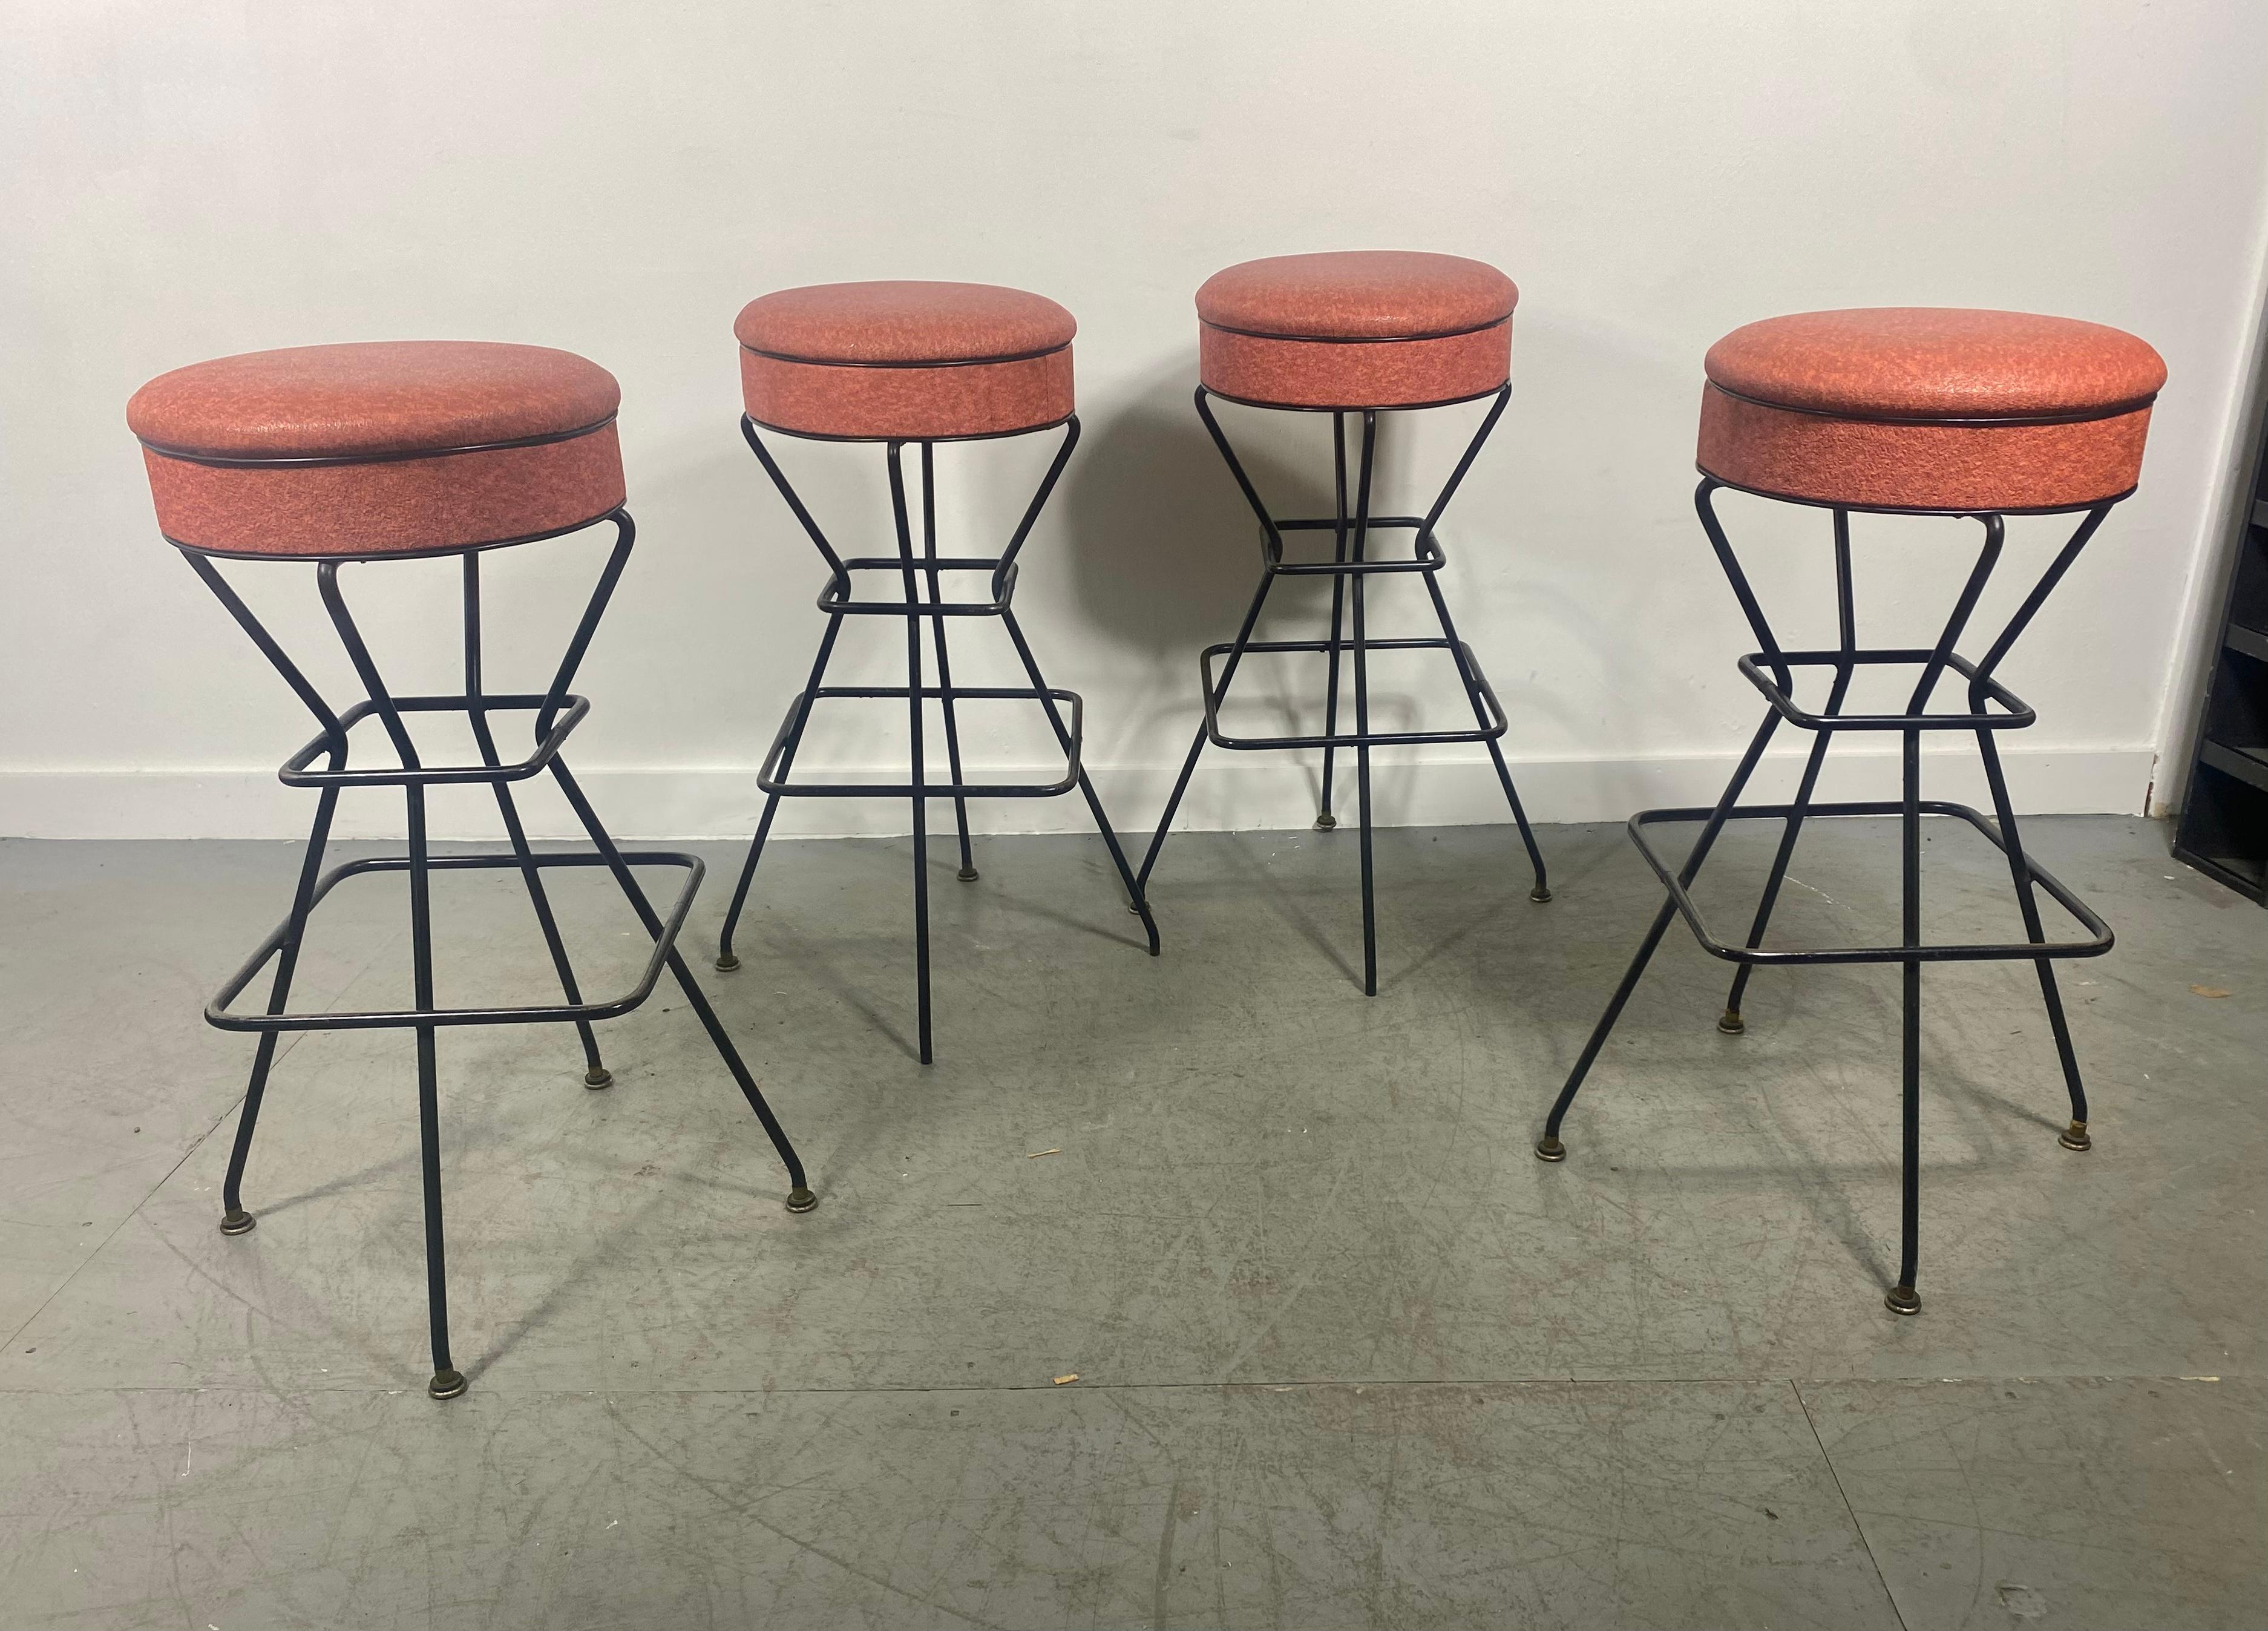 Classic Midcentury Frederic Weinberg Bar / Counter Stools, Iron and Naugahyde In Good Condition For Sale In Buffalo, NY